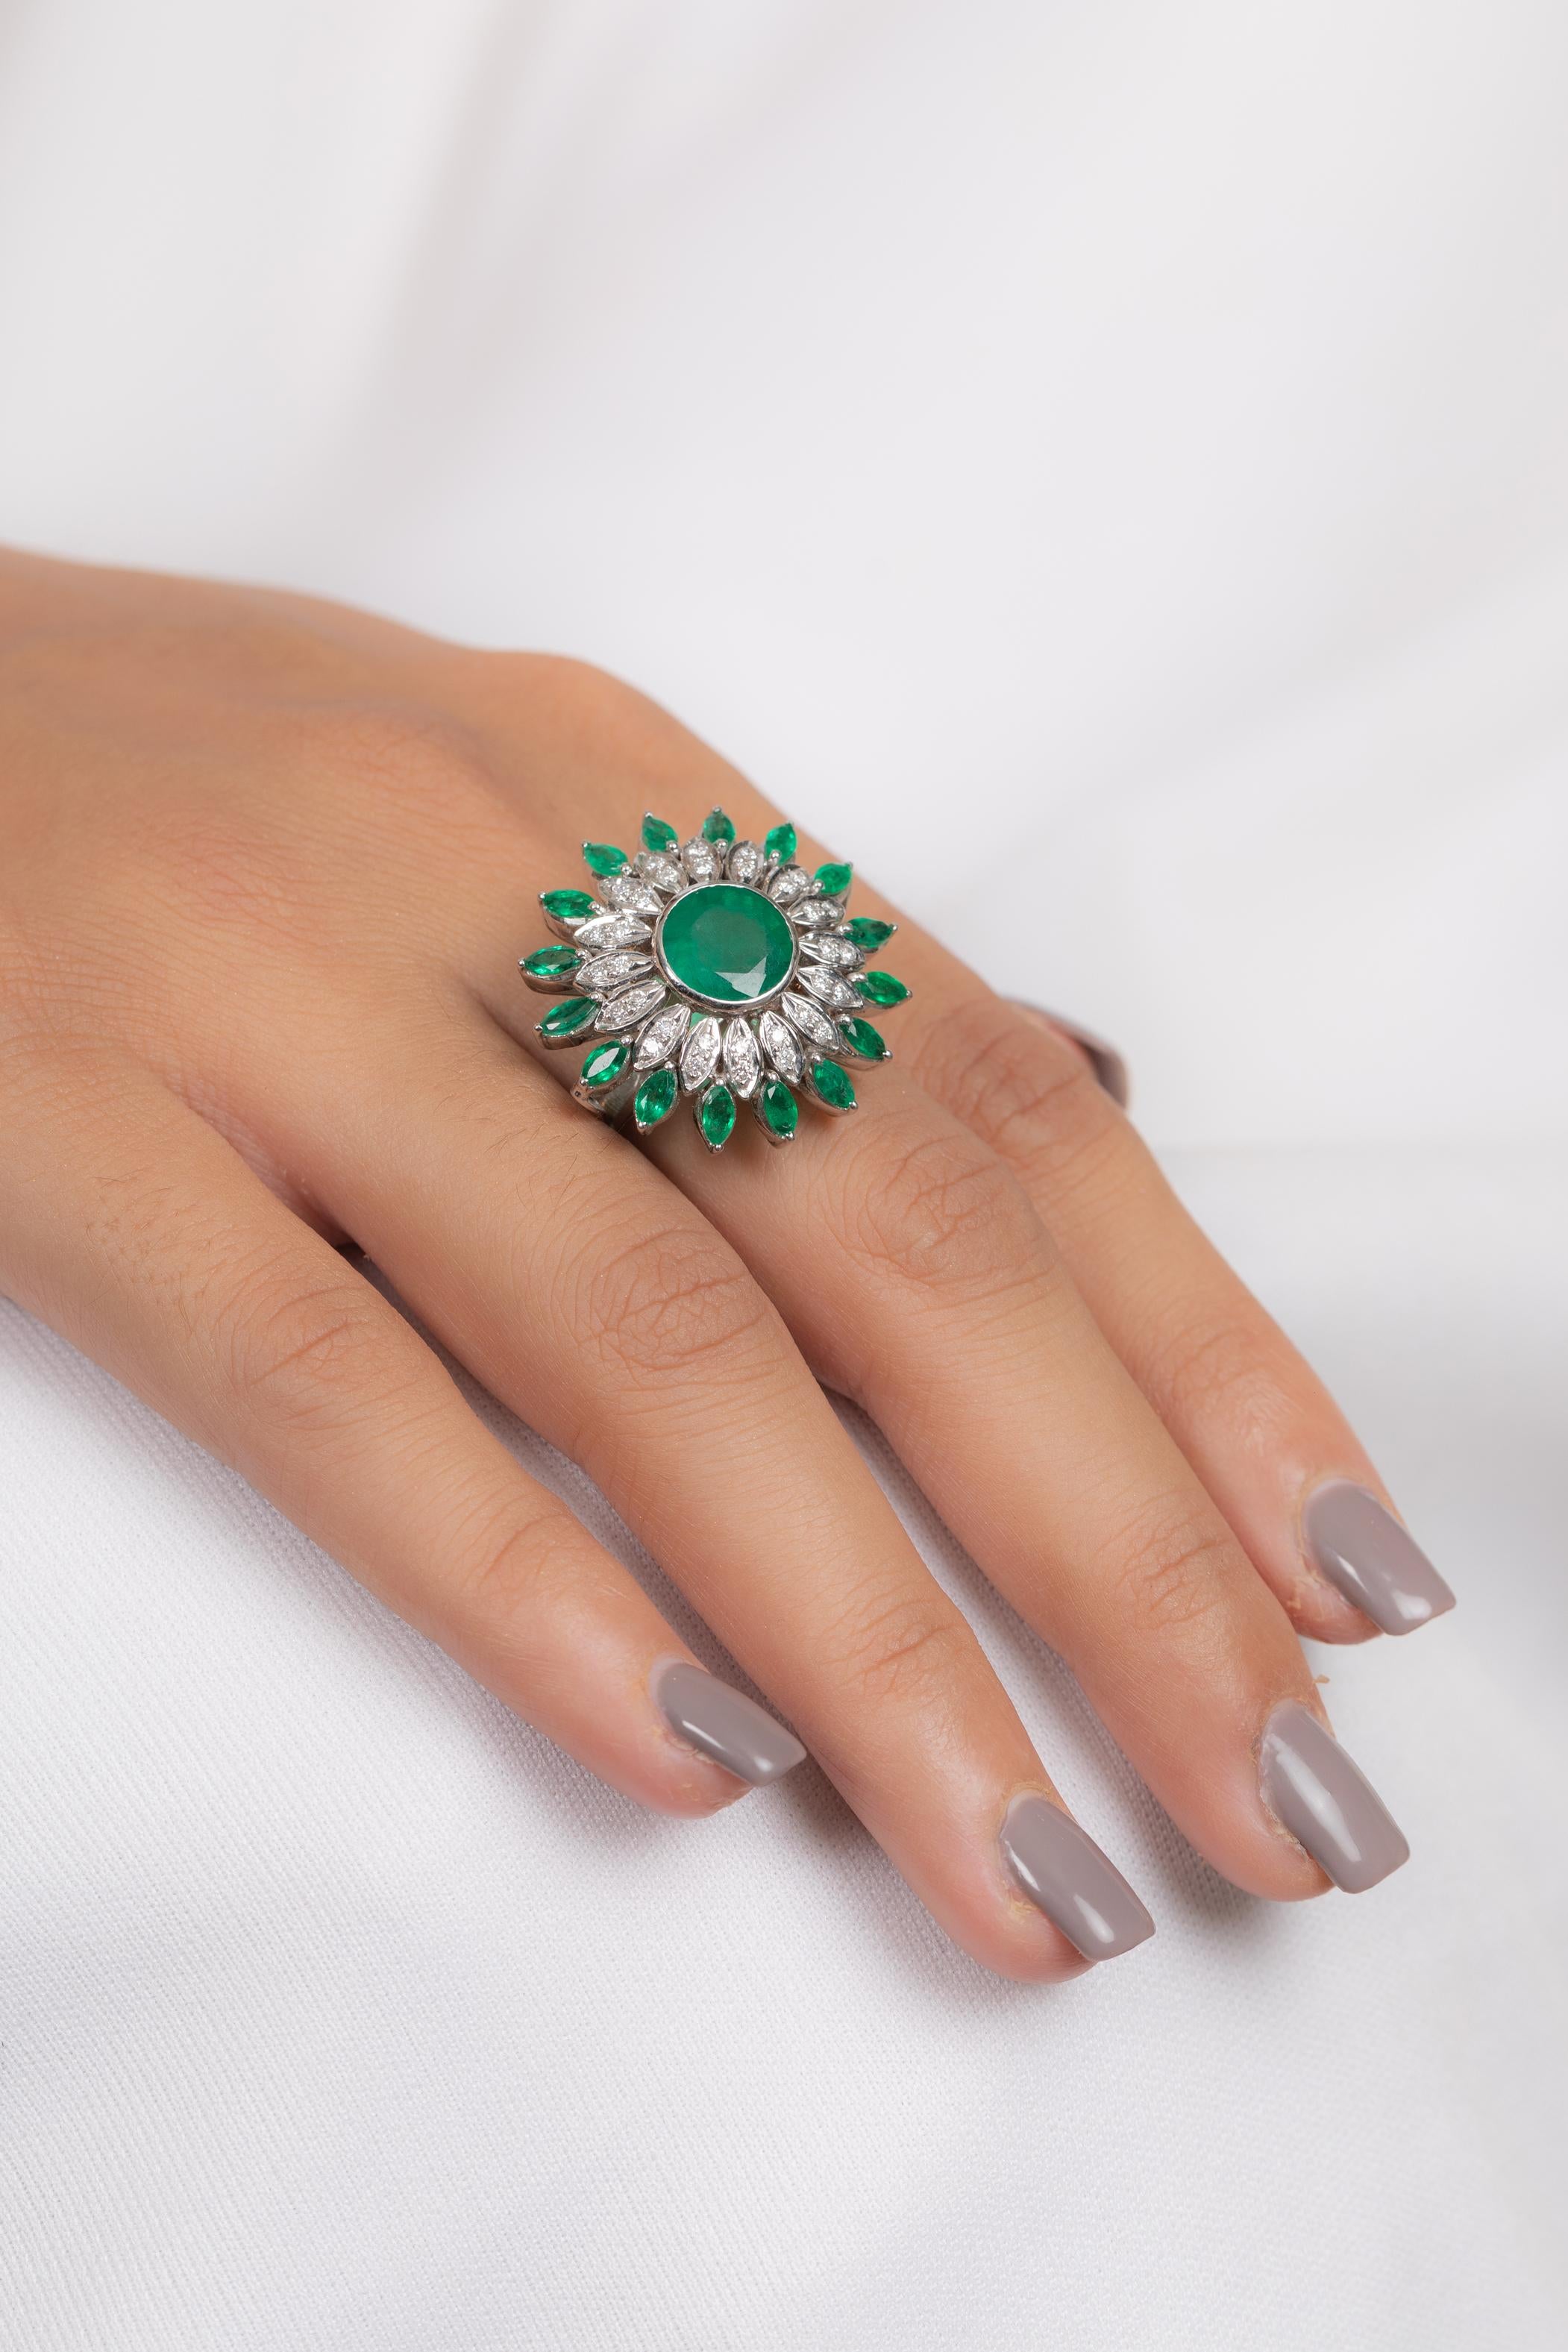 For Sale:  Statement Emerald Ring in 18K White Gold with Diamonds 8